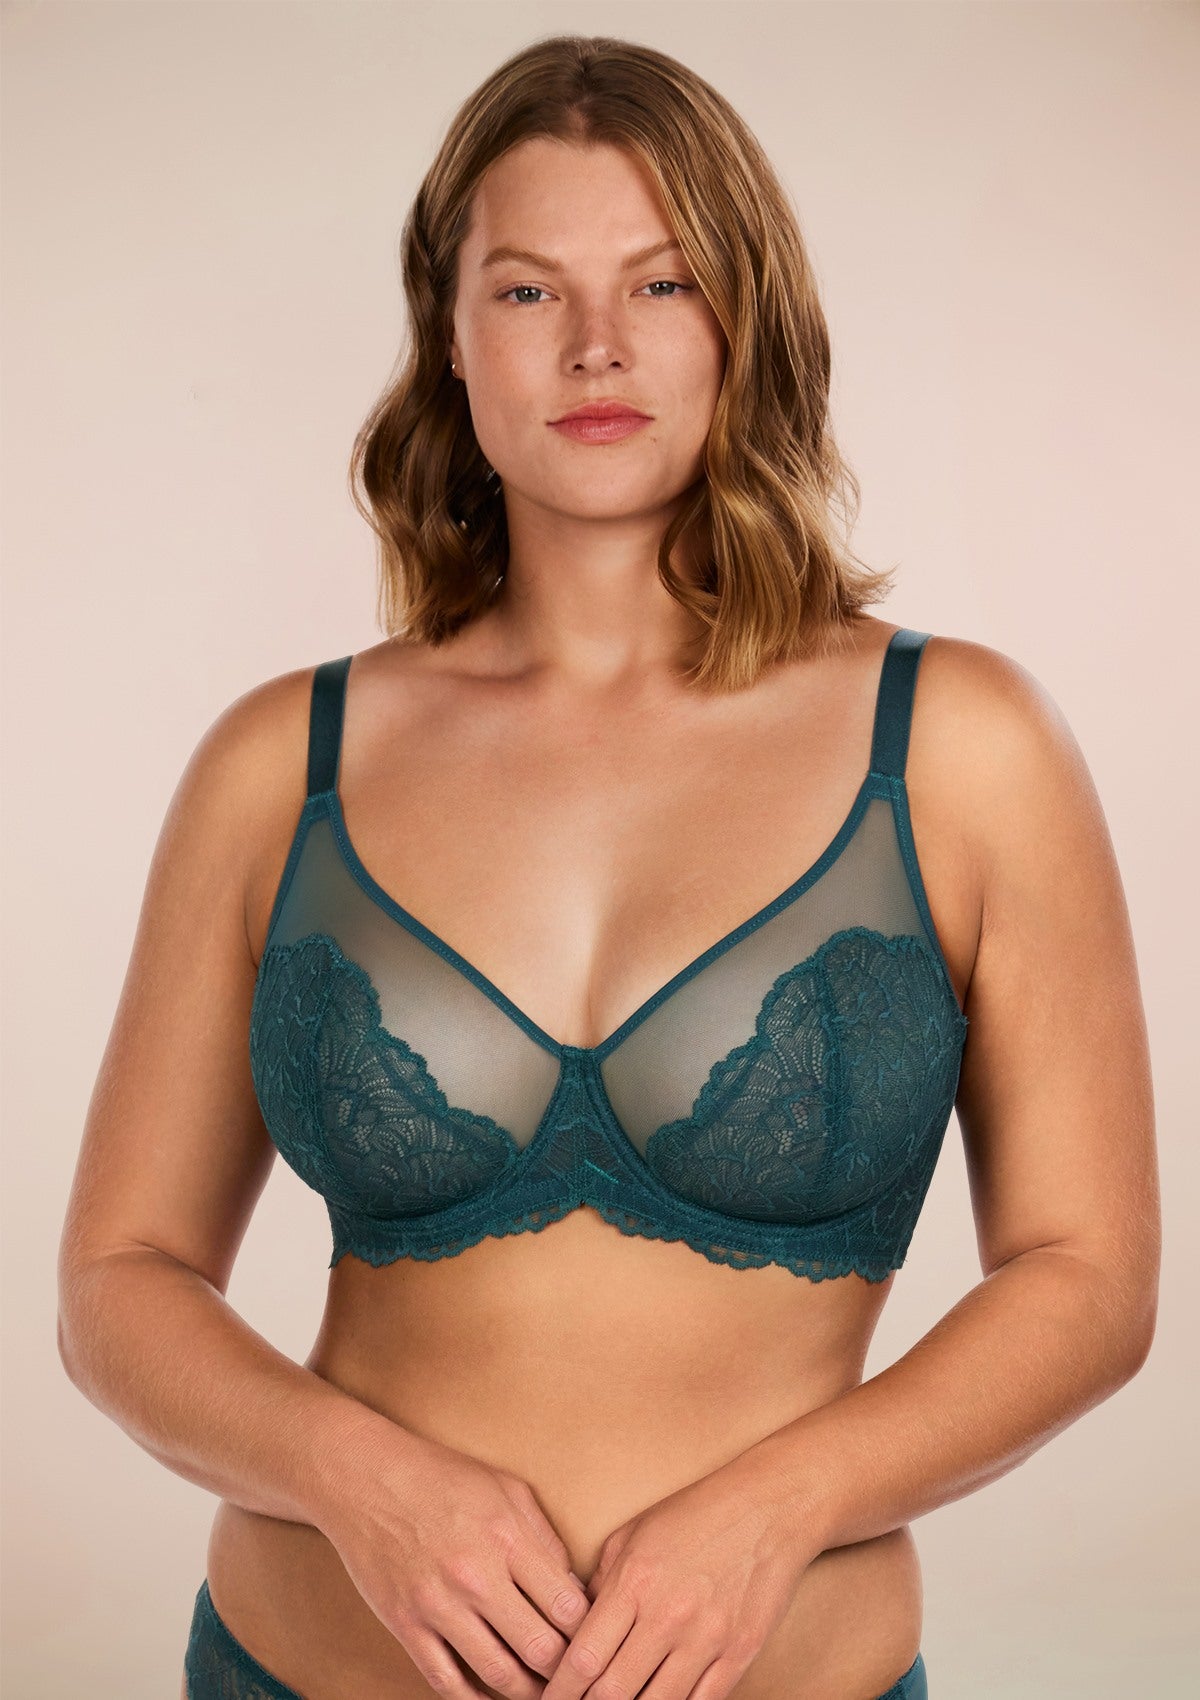 HSIA Blossom Full Figure See-Through Lace Bra For Side And Back Fat - Balsam Blue / 34 / H